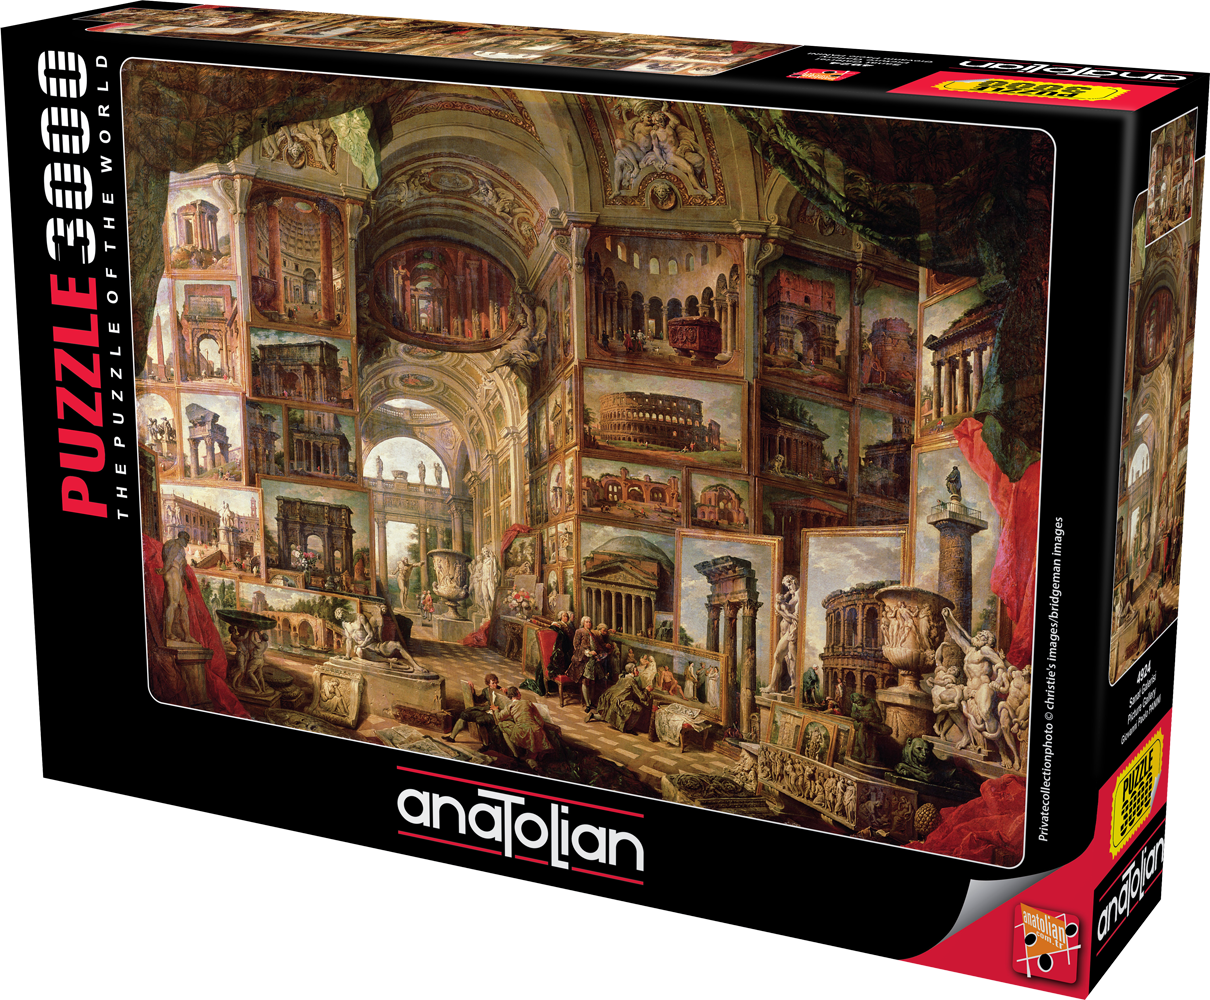 Anatolian Picture Gallery 3000 PC Jigsaw Puzzle 4924